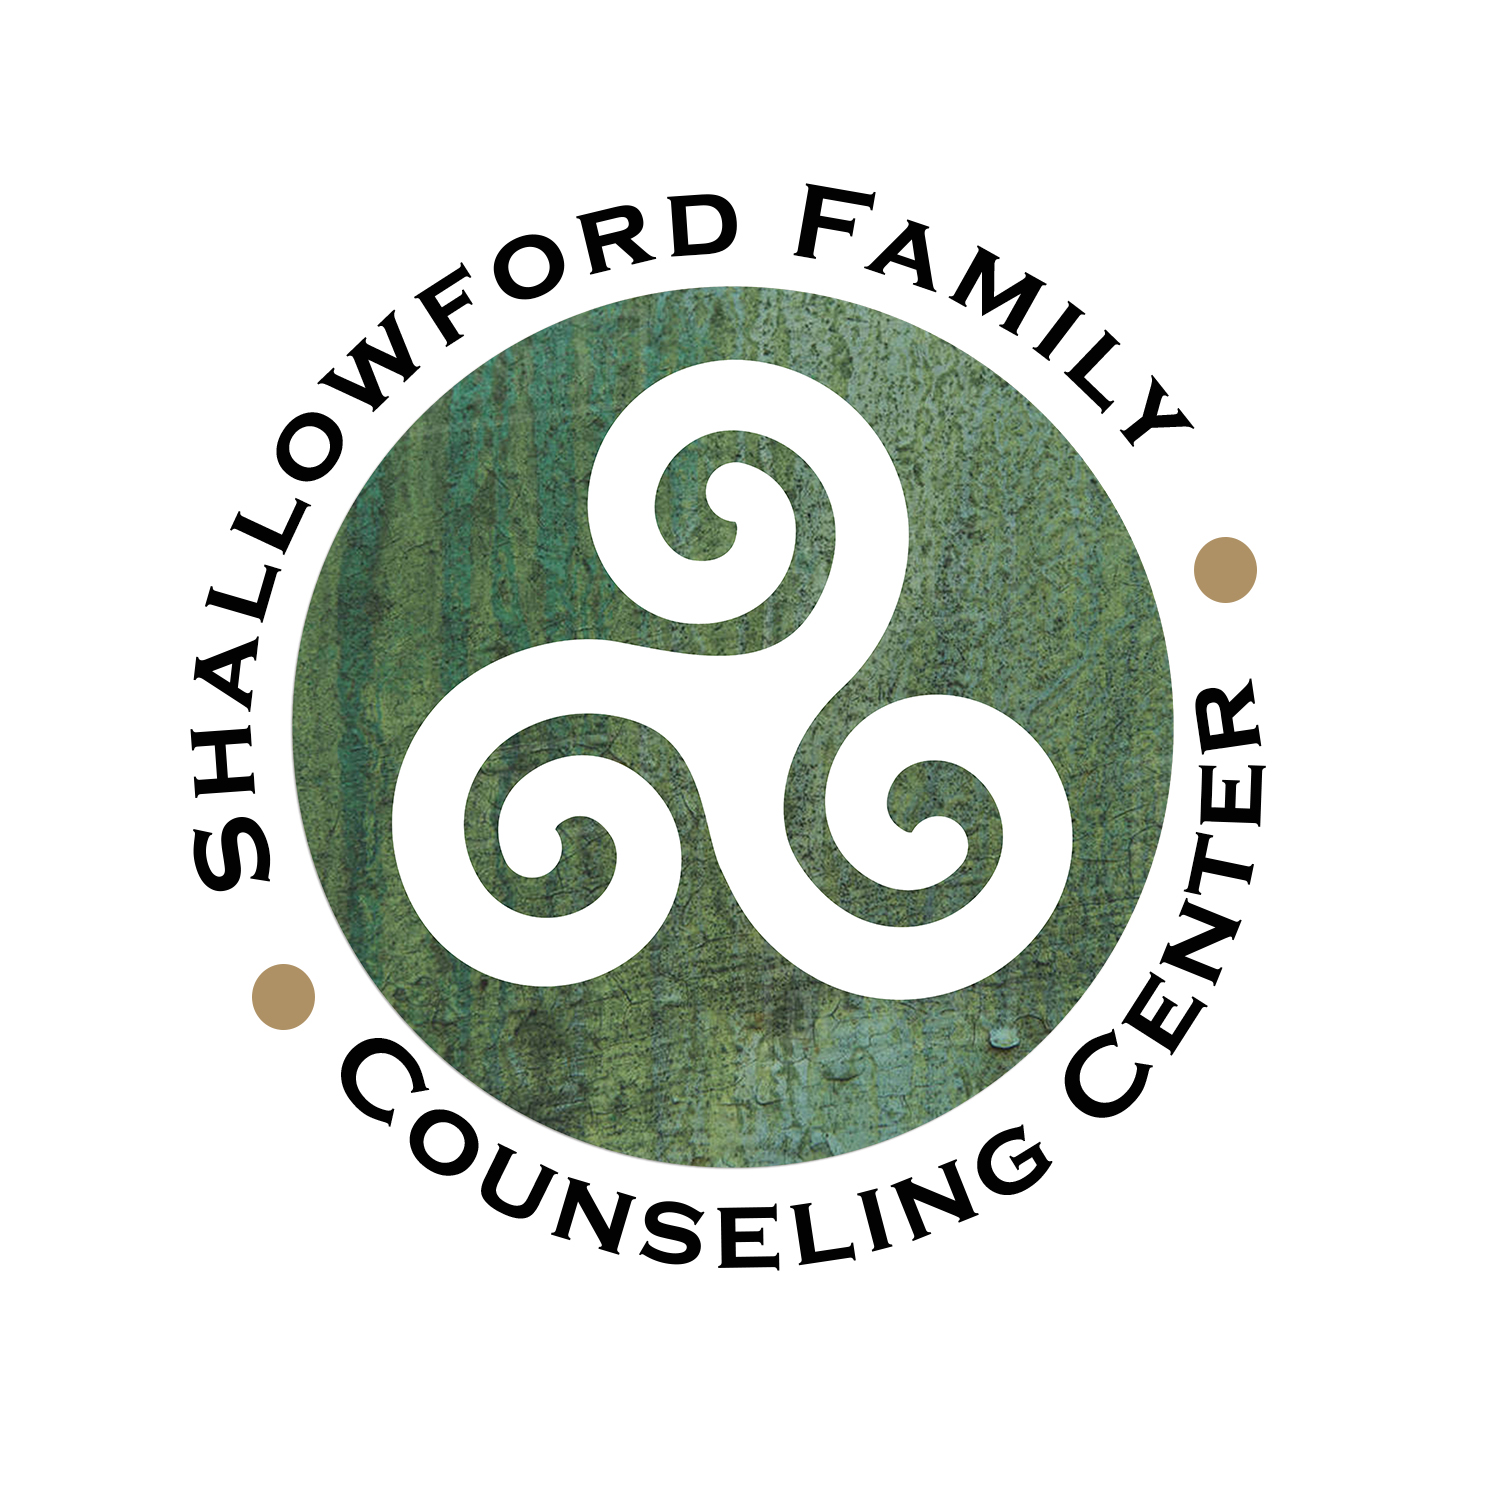 Shallowford Family Counseling Center logo